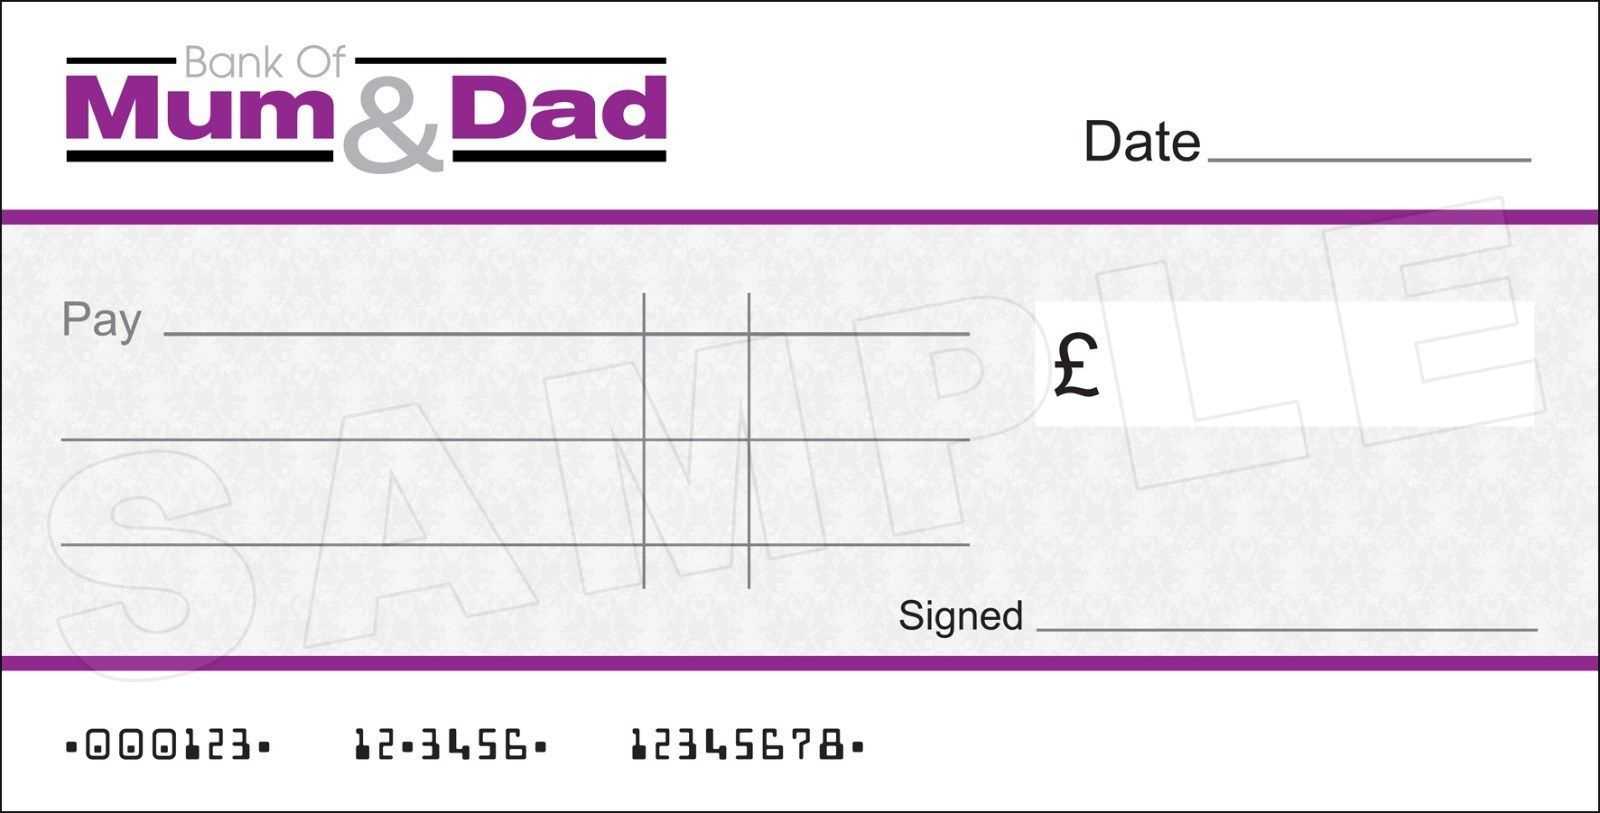 details-about-large-blank-bank-of-mum-dad-cheque-dads-pertaining-to